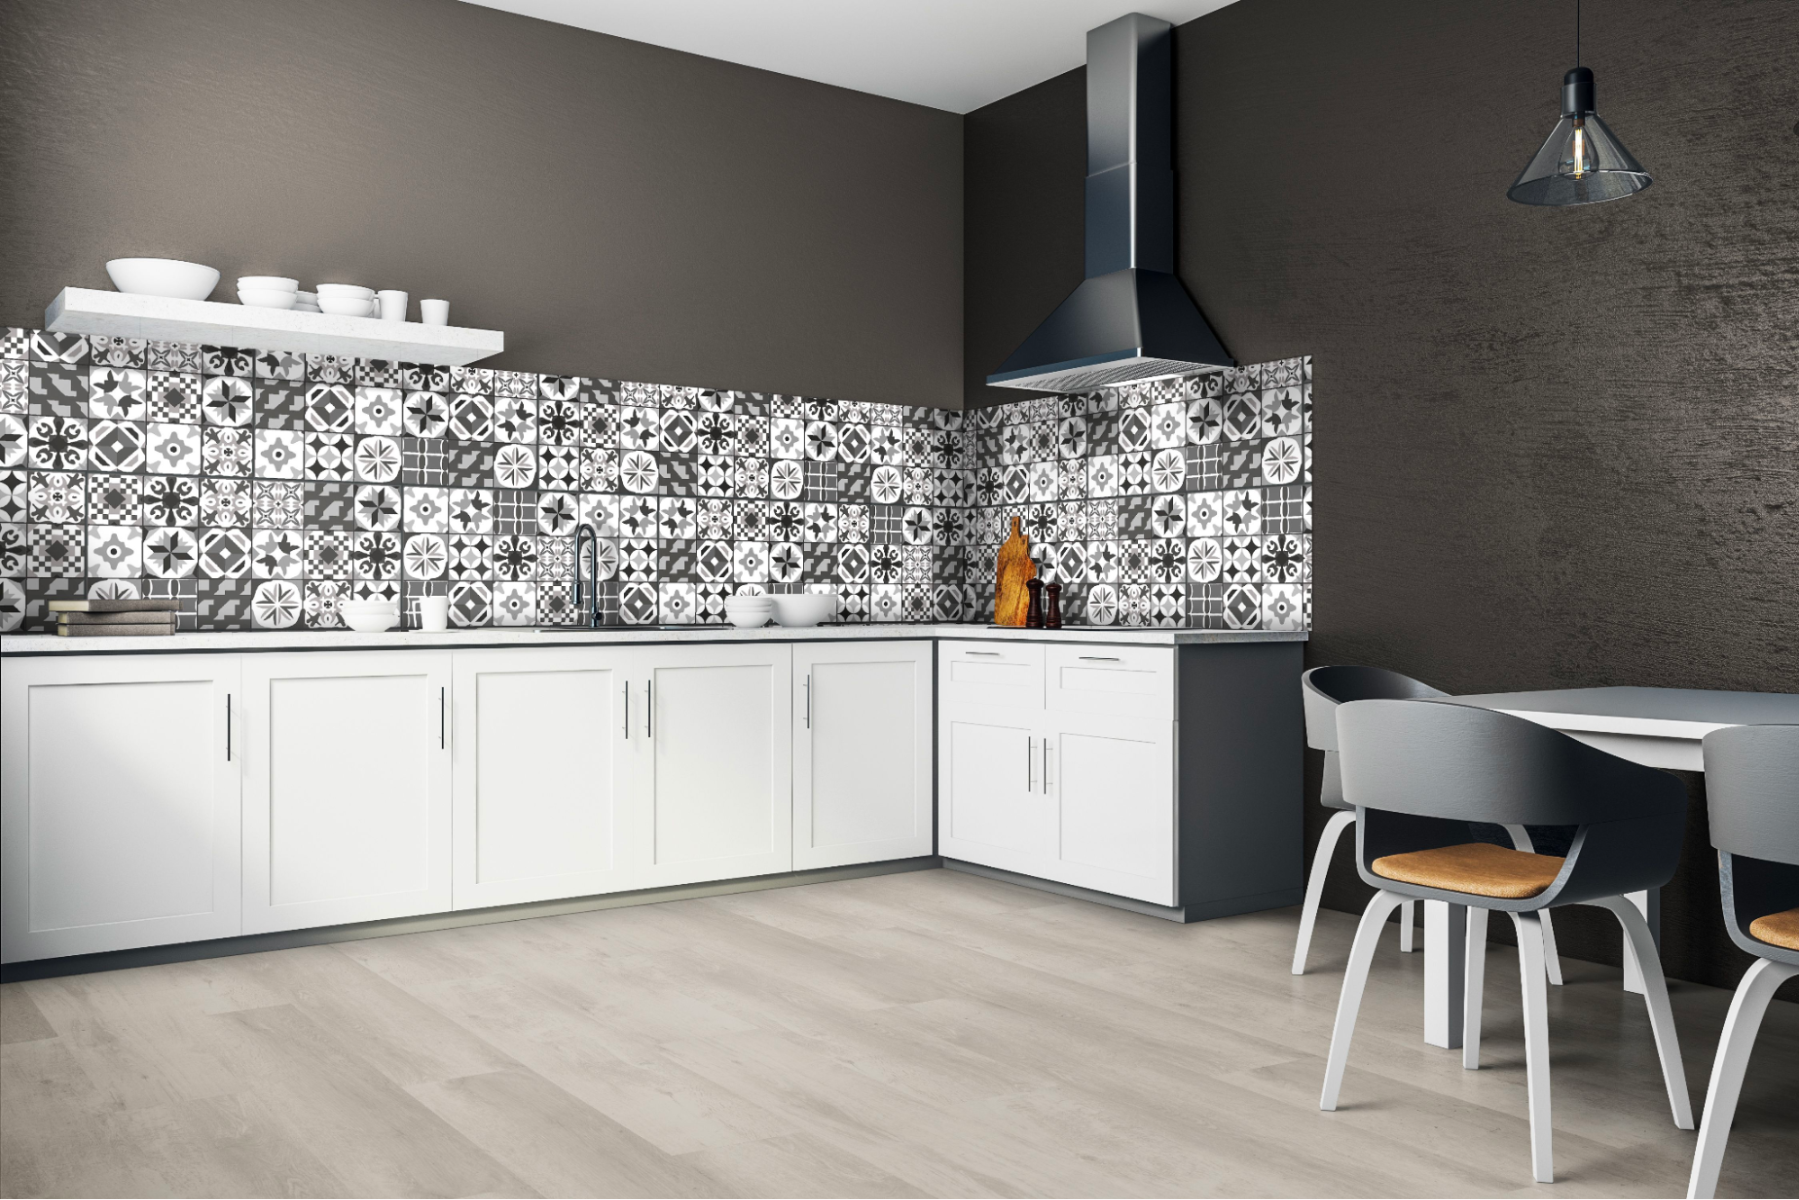 L-shaped kitchen with grey timber flooring, white cabinets and a black-and-white patterned wall covering.